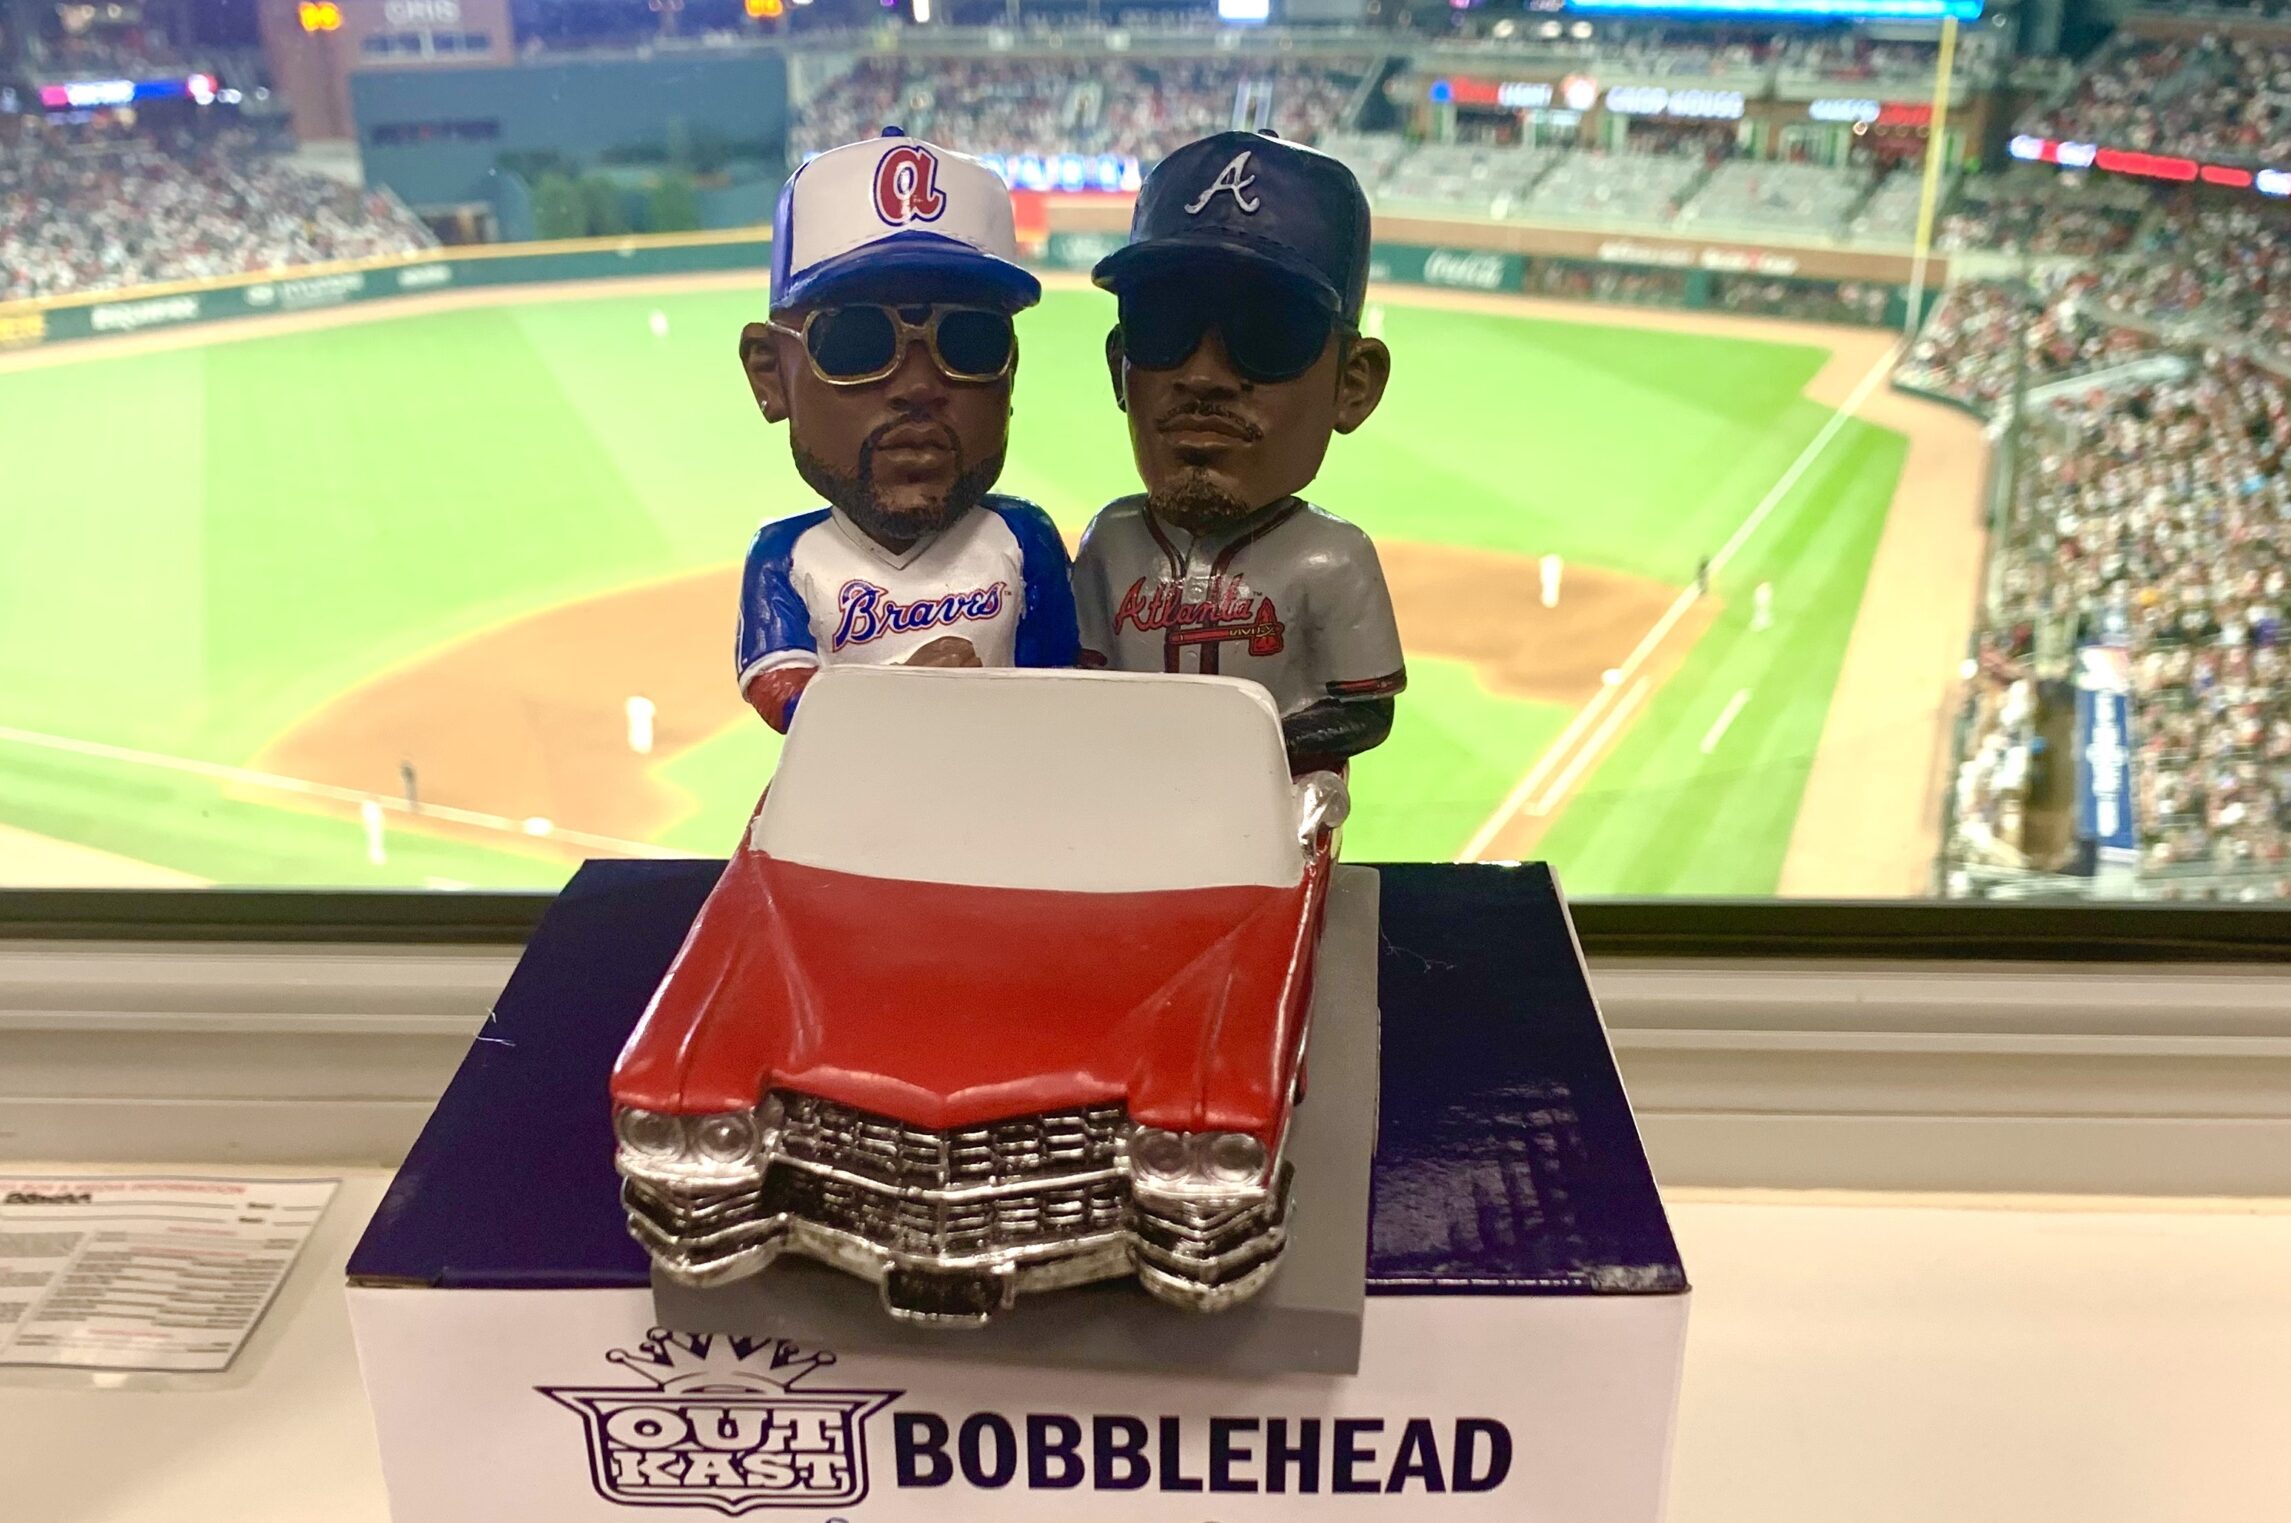 OutKast Bobblehead Night Proves To Be A Hit, Breaks Attendance Records For  Atlanta Braves